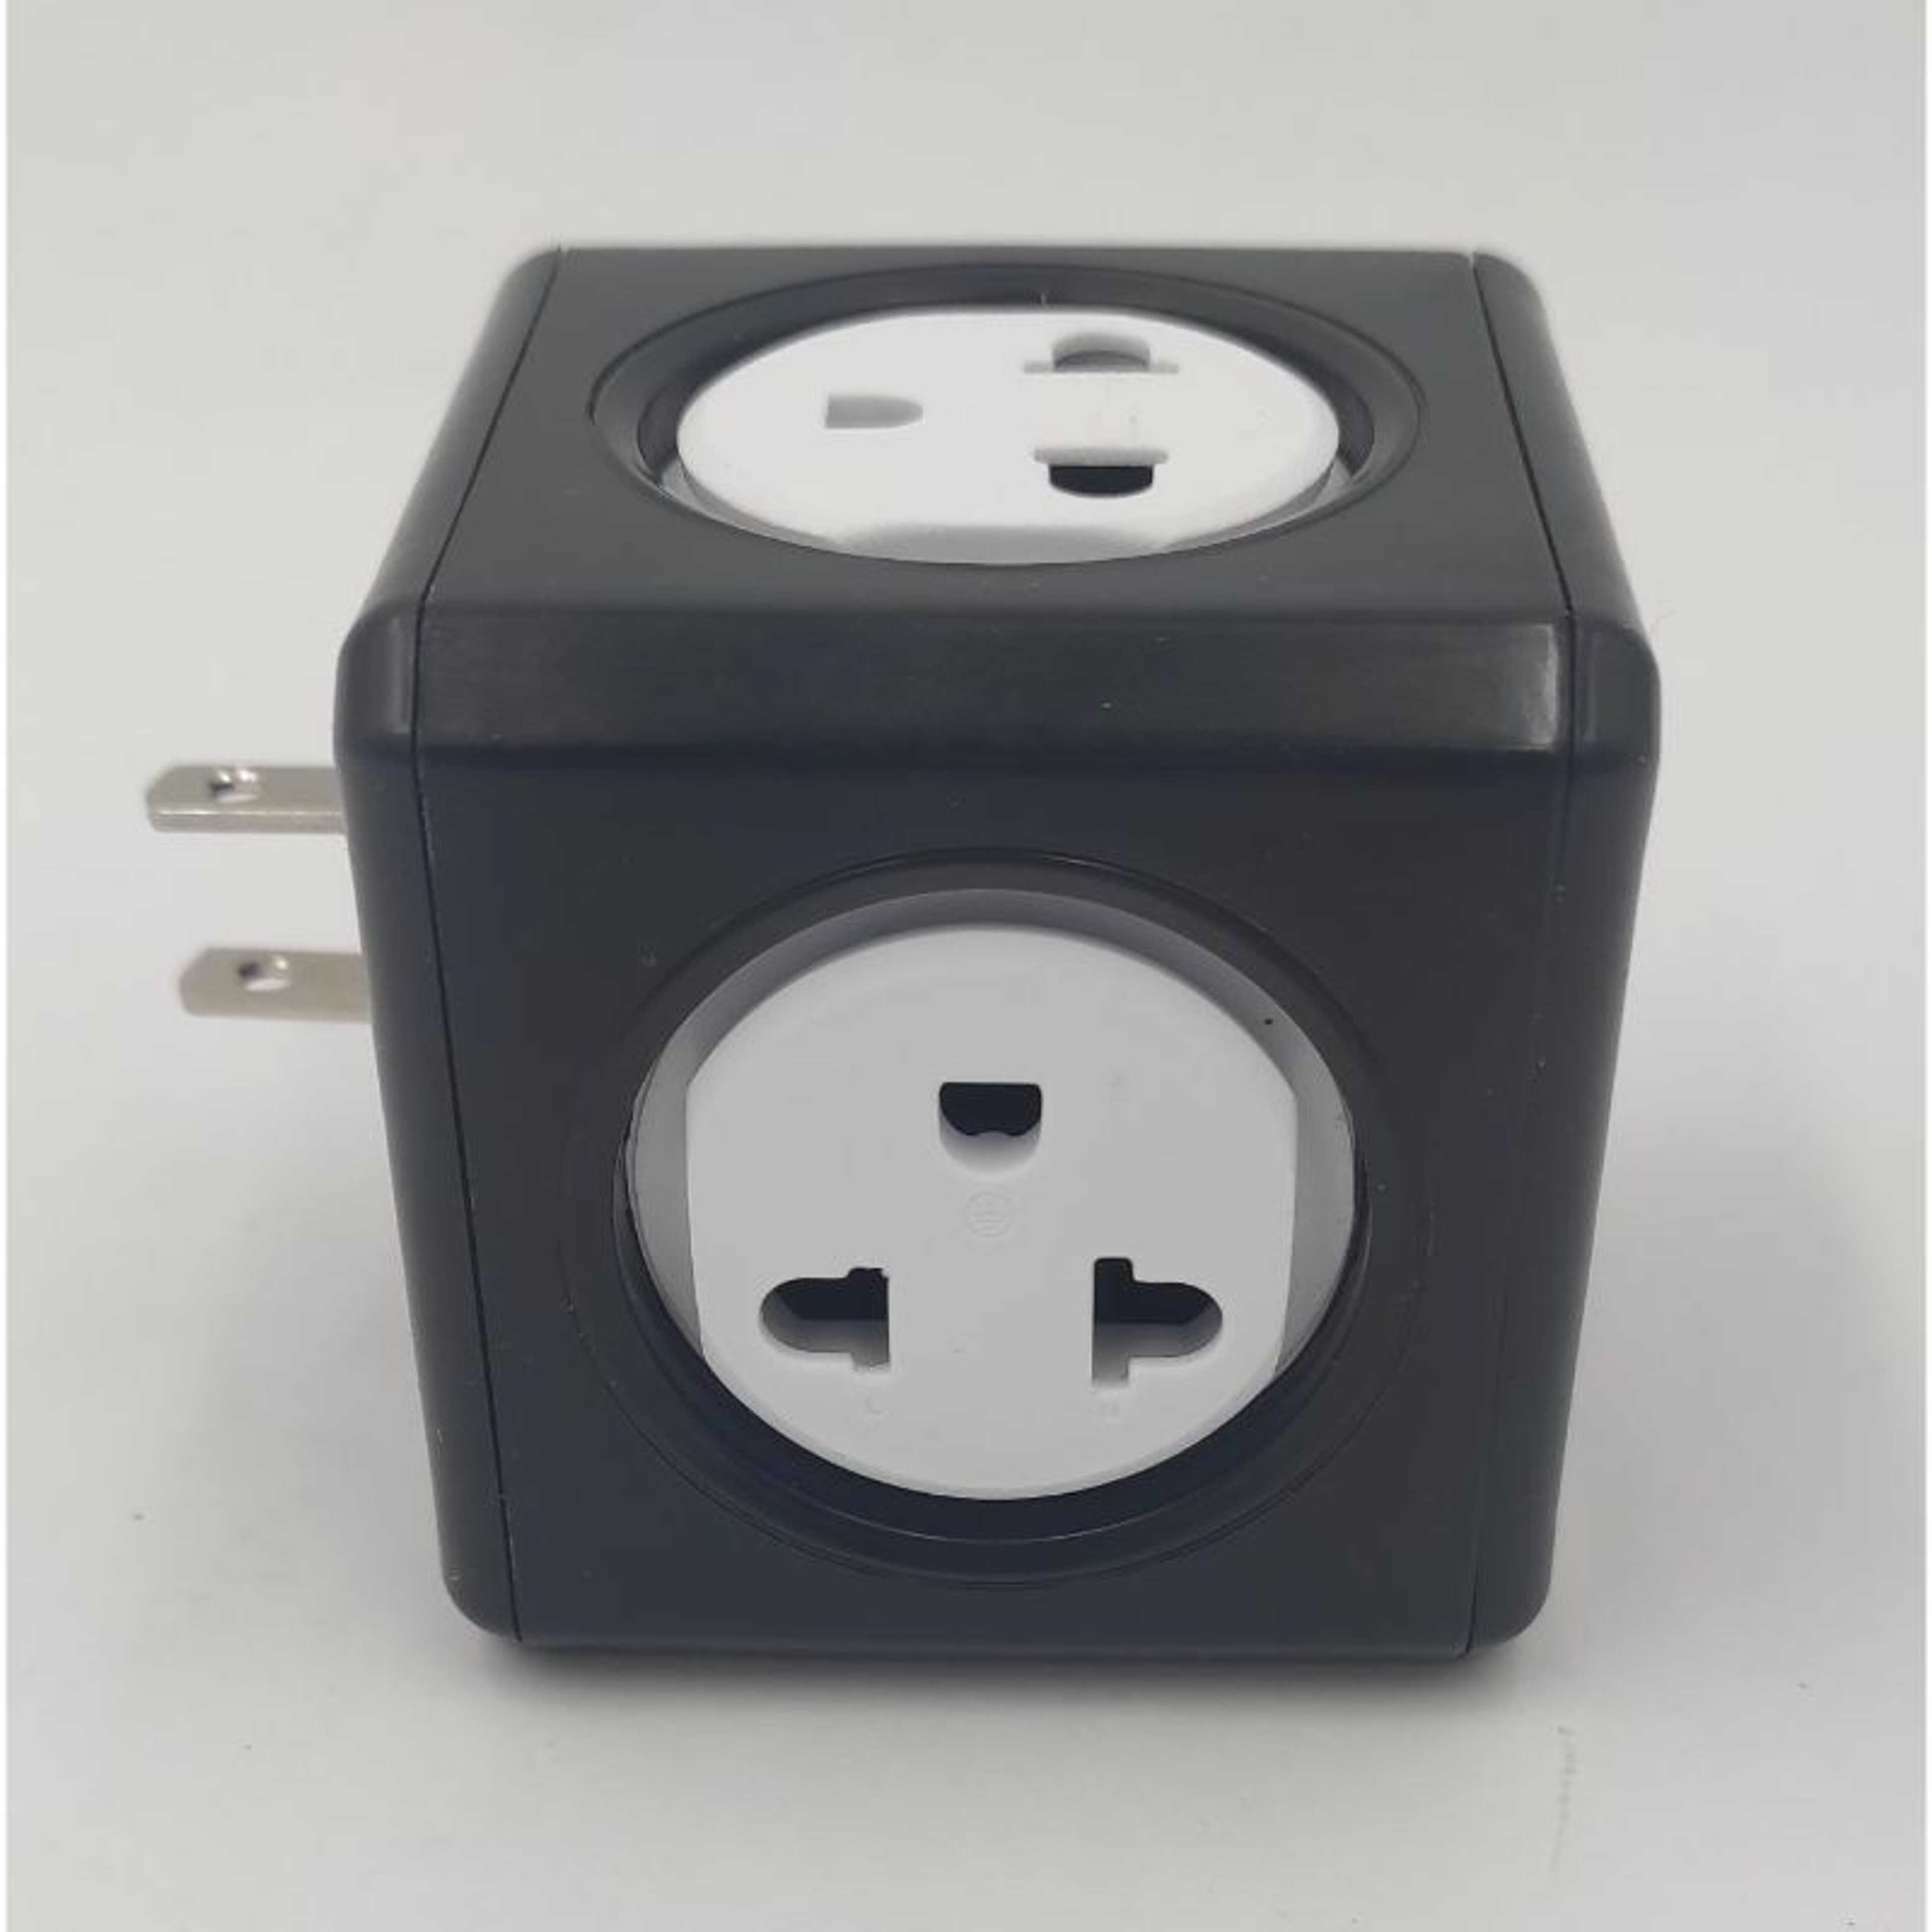 Power Cube, 5 Outlets Power Adapter Wall Adapter, Household Cube Socket Power Outlet